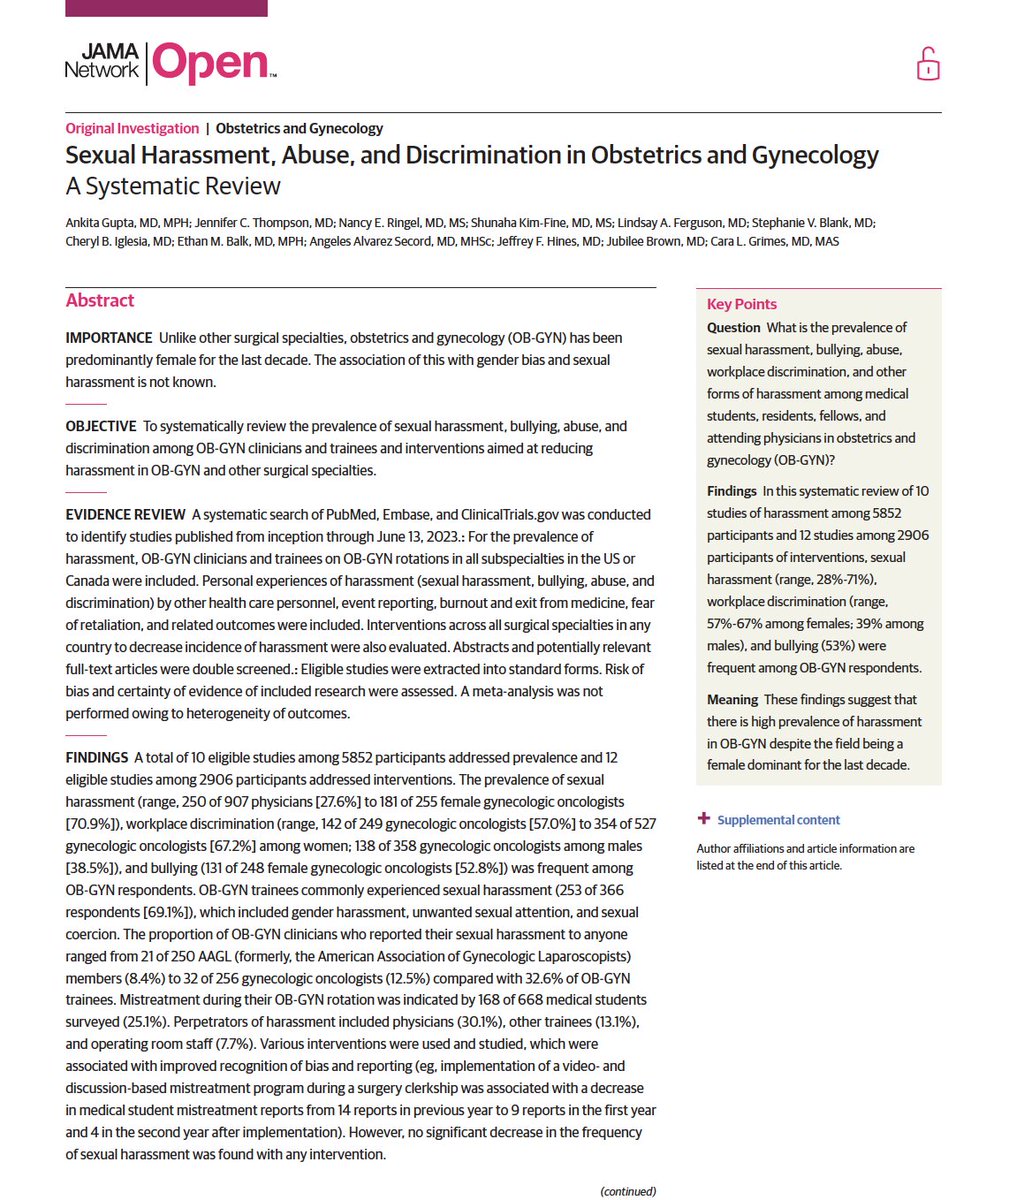 OB/GYNs report high levels of sexual harassment, according to a systematic review. This even through the profession is so overwhelmingly comprised of women. jamanetwork.com/journals/jaman…